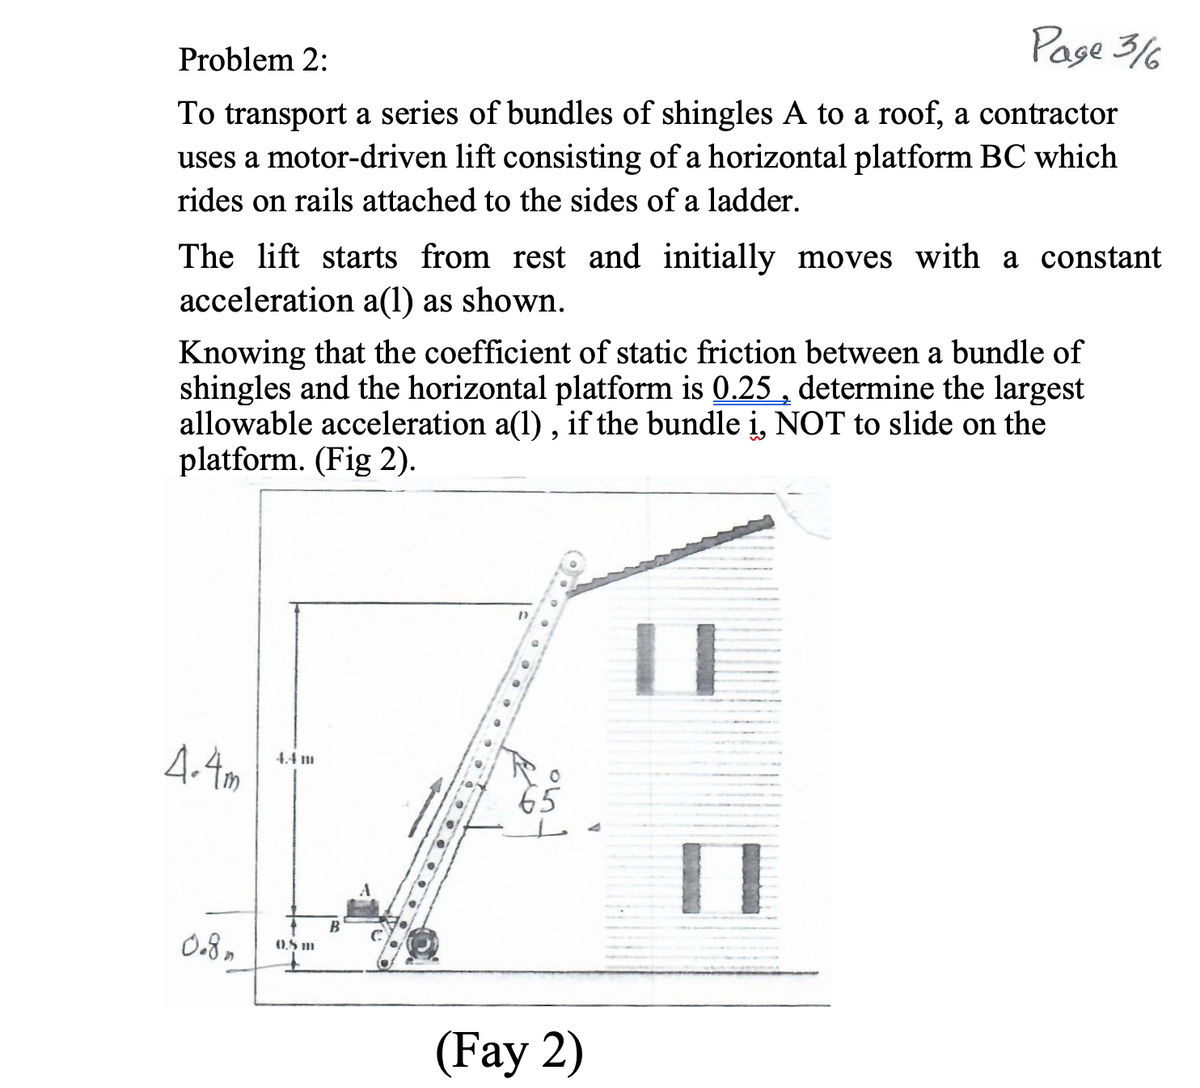 Page 3/6
Problem 2:
To transport a series of bundles of shingles A to a roof, a contractor
uses a motor-driven lift consisting of a horizontal platform BC which
rides on rails attached to the sides of a ladder.
The lift starts from rest and initially moves with a constant
acceleration a(1) as shown.
Knowing that the coefficient of static friction between a bundle of
shingles and the horizontal platform is 0.25 , determine the largest
allowable acceleration a(1) , if the bundle i, NOT to slide on the
platform. (Fig 2).
4.4m
4.4 1
65
B
0.8,
0.5 m
(Fay 2)
